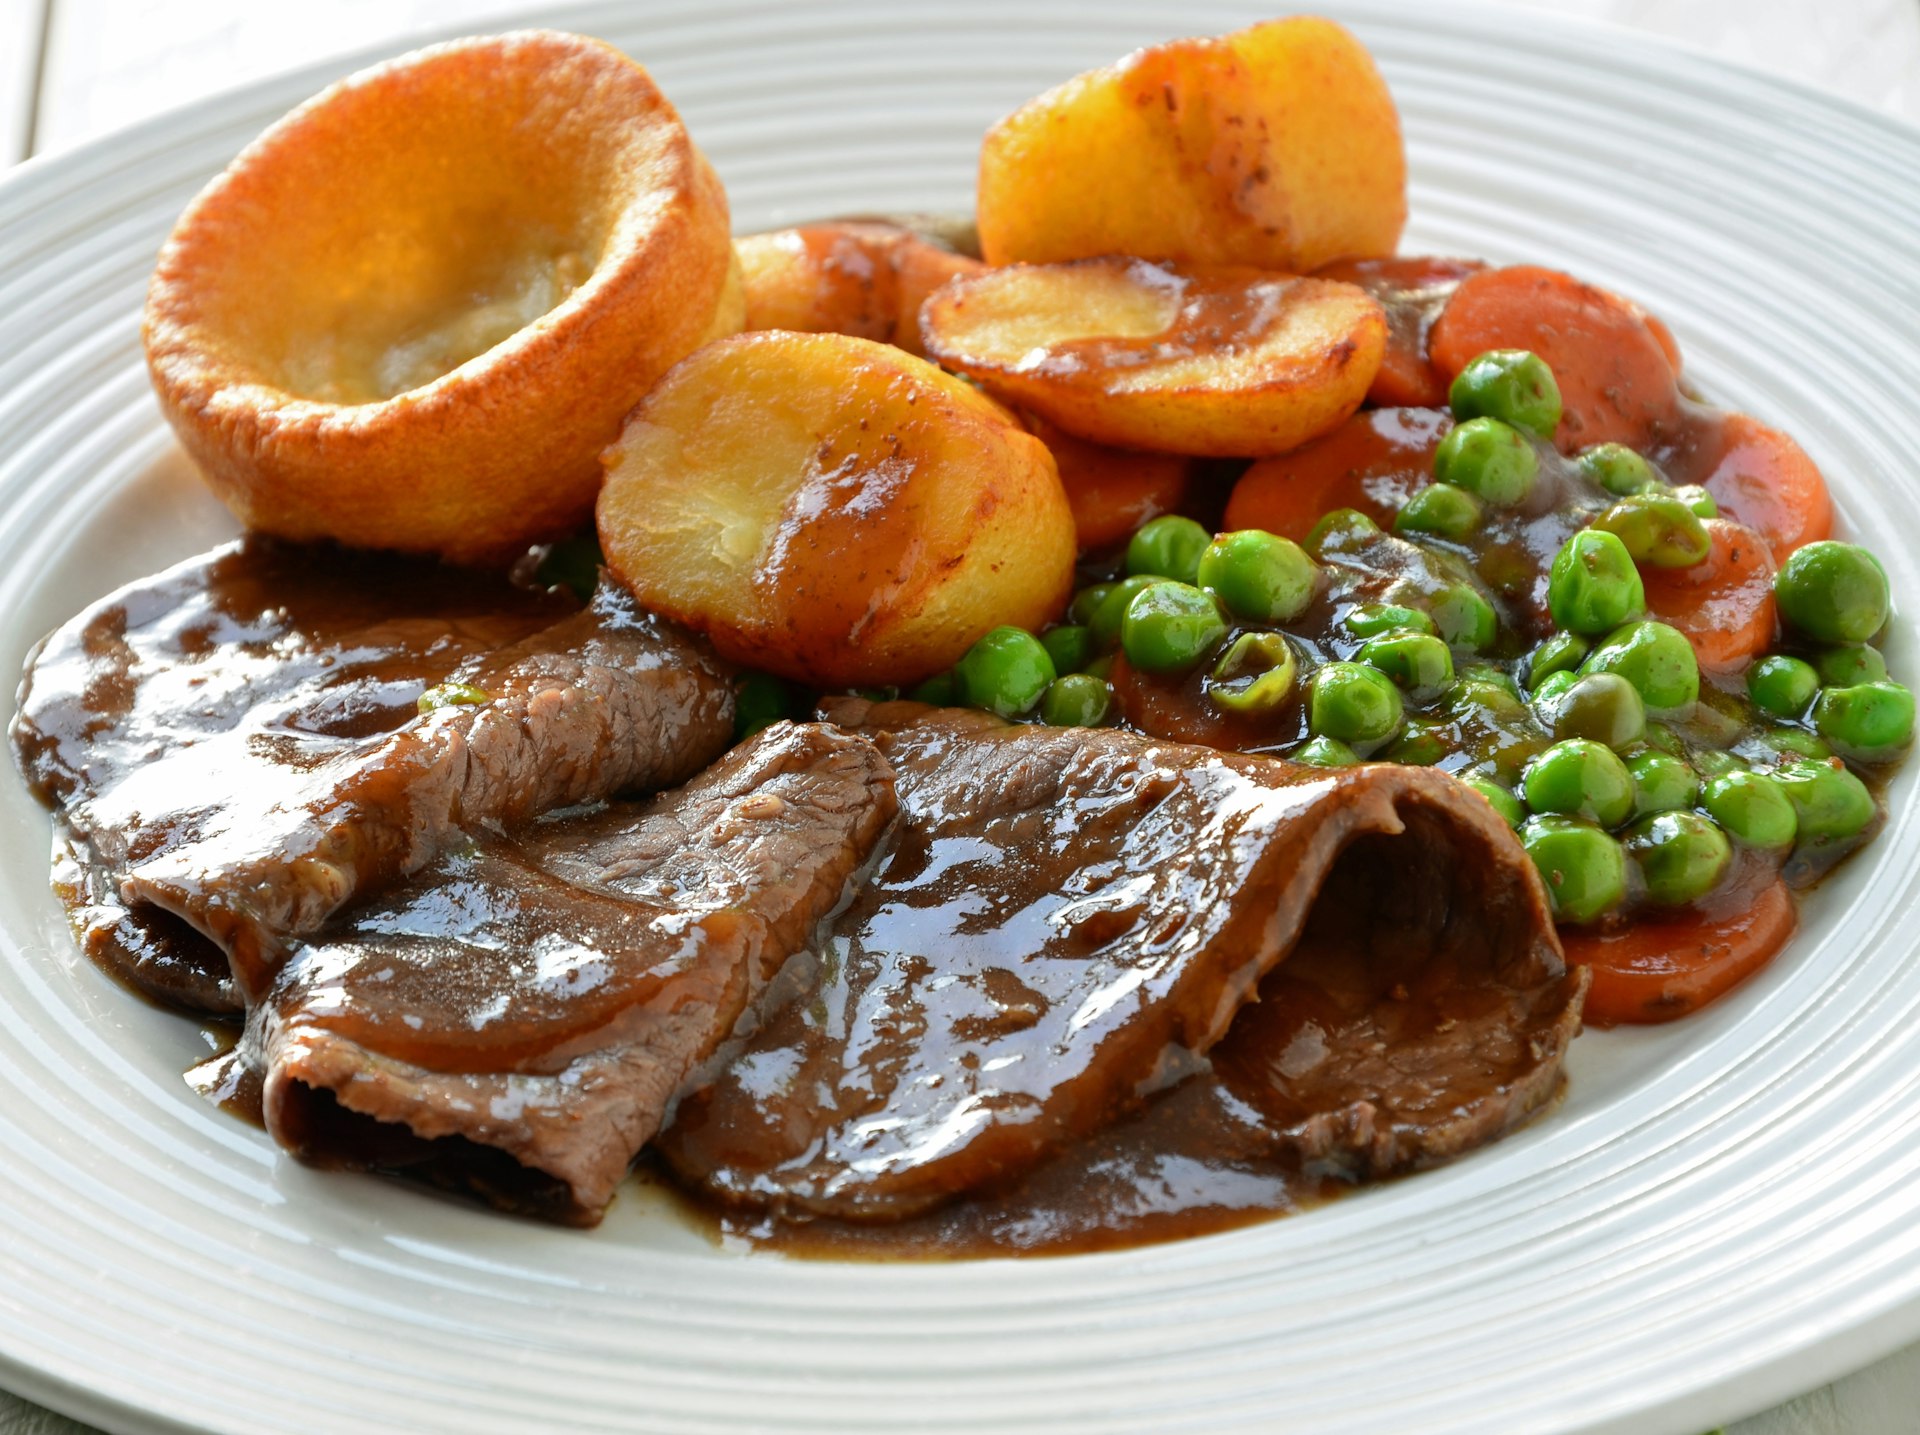 A plate of roast beef smothered in gravy with a side of Yorkshire Pudding and veggies